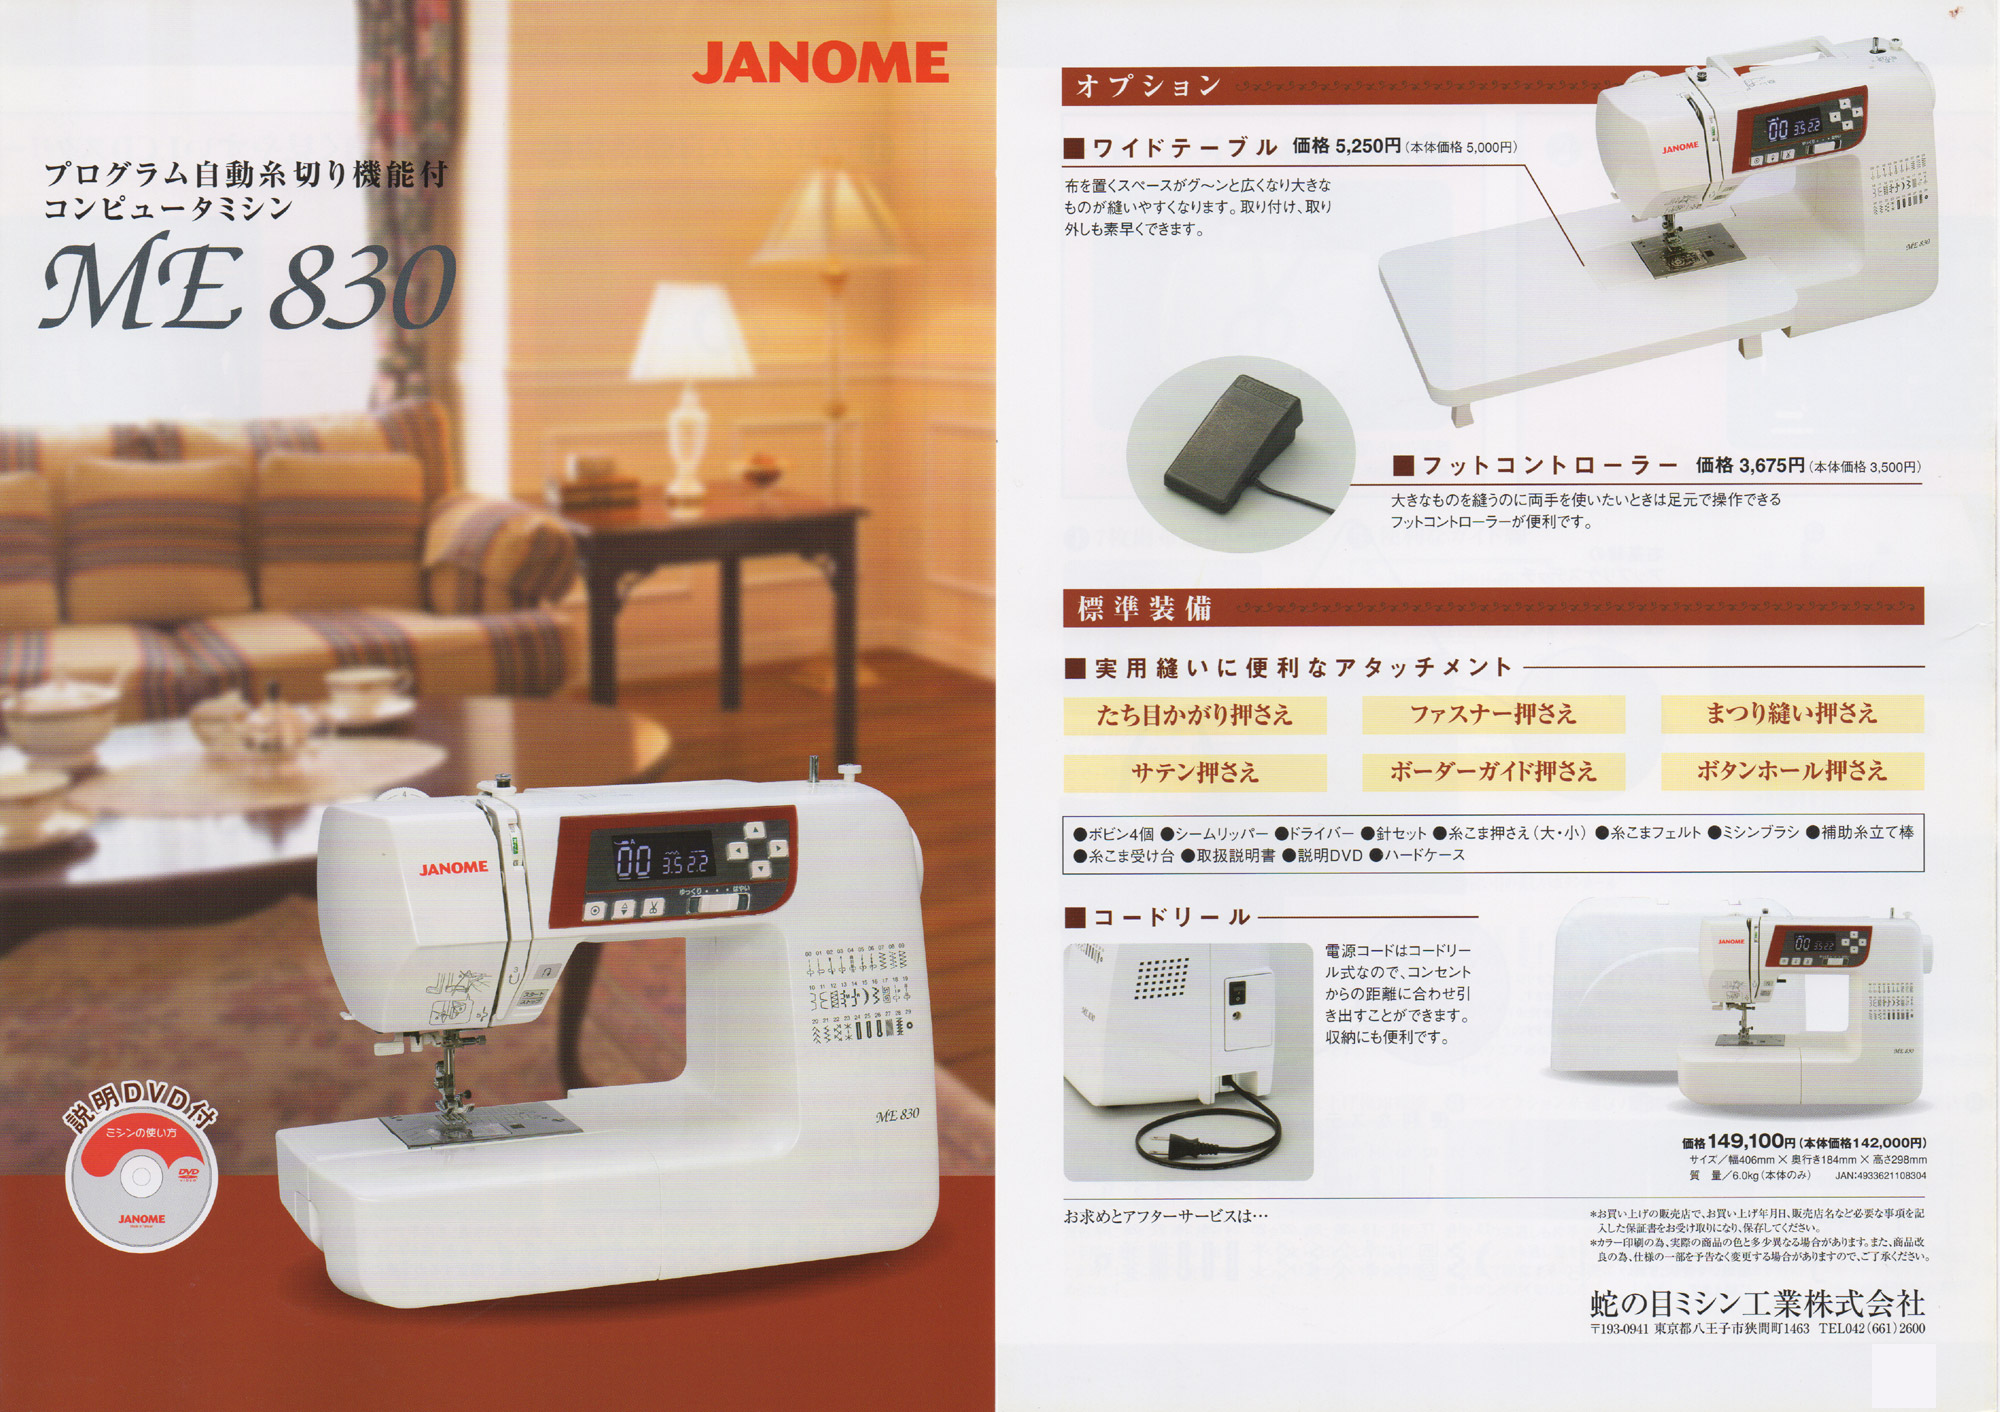 G56 JANOME  ME830 コンピューターミシン 未使用